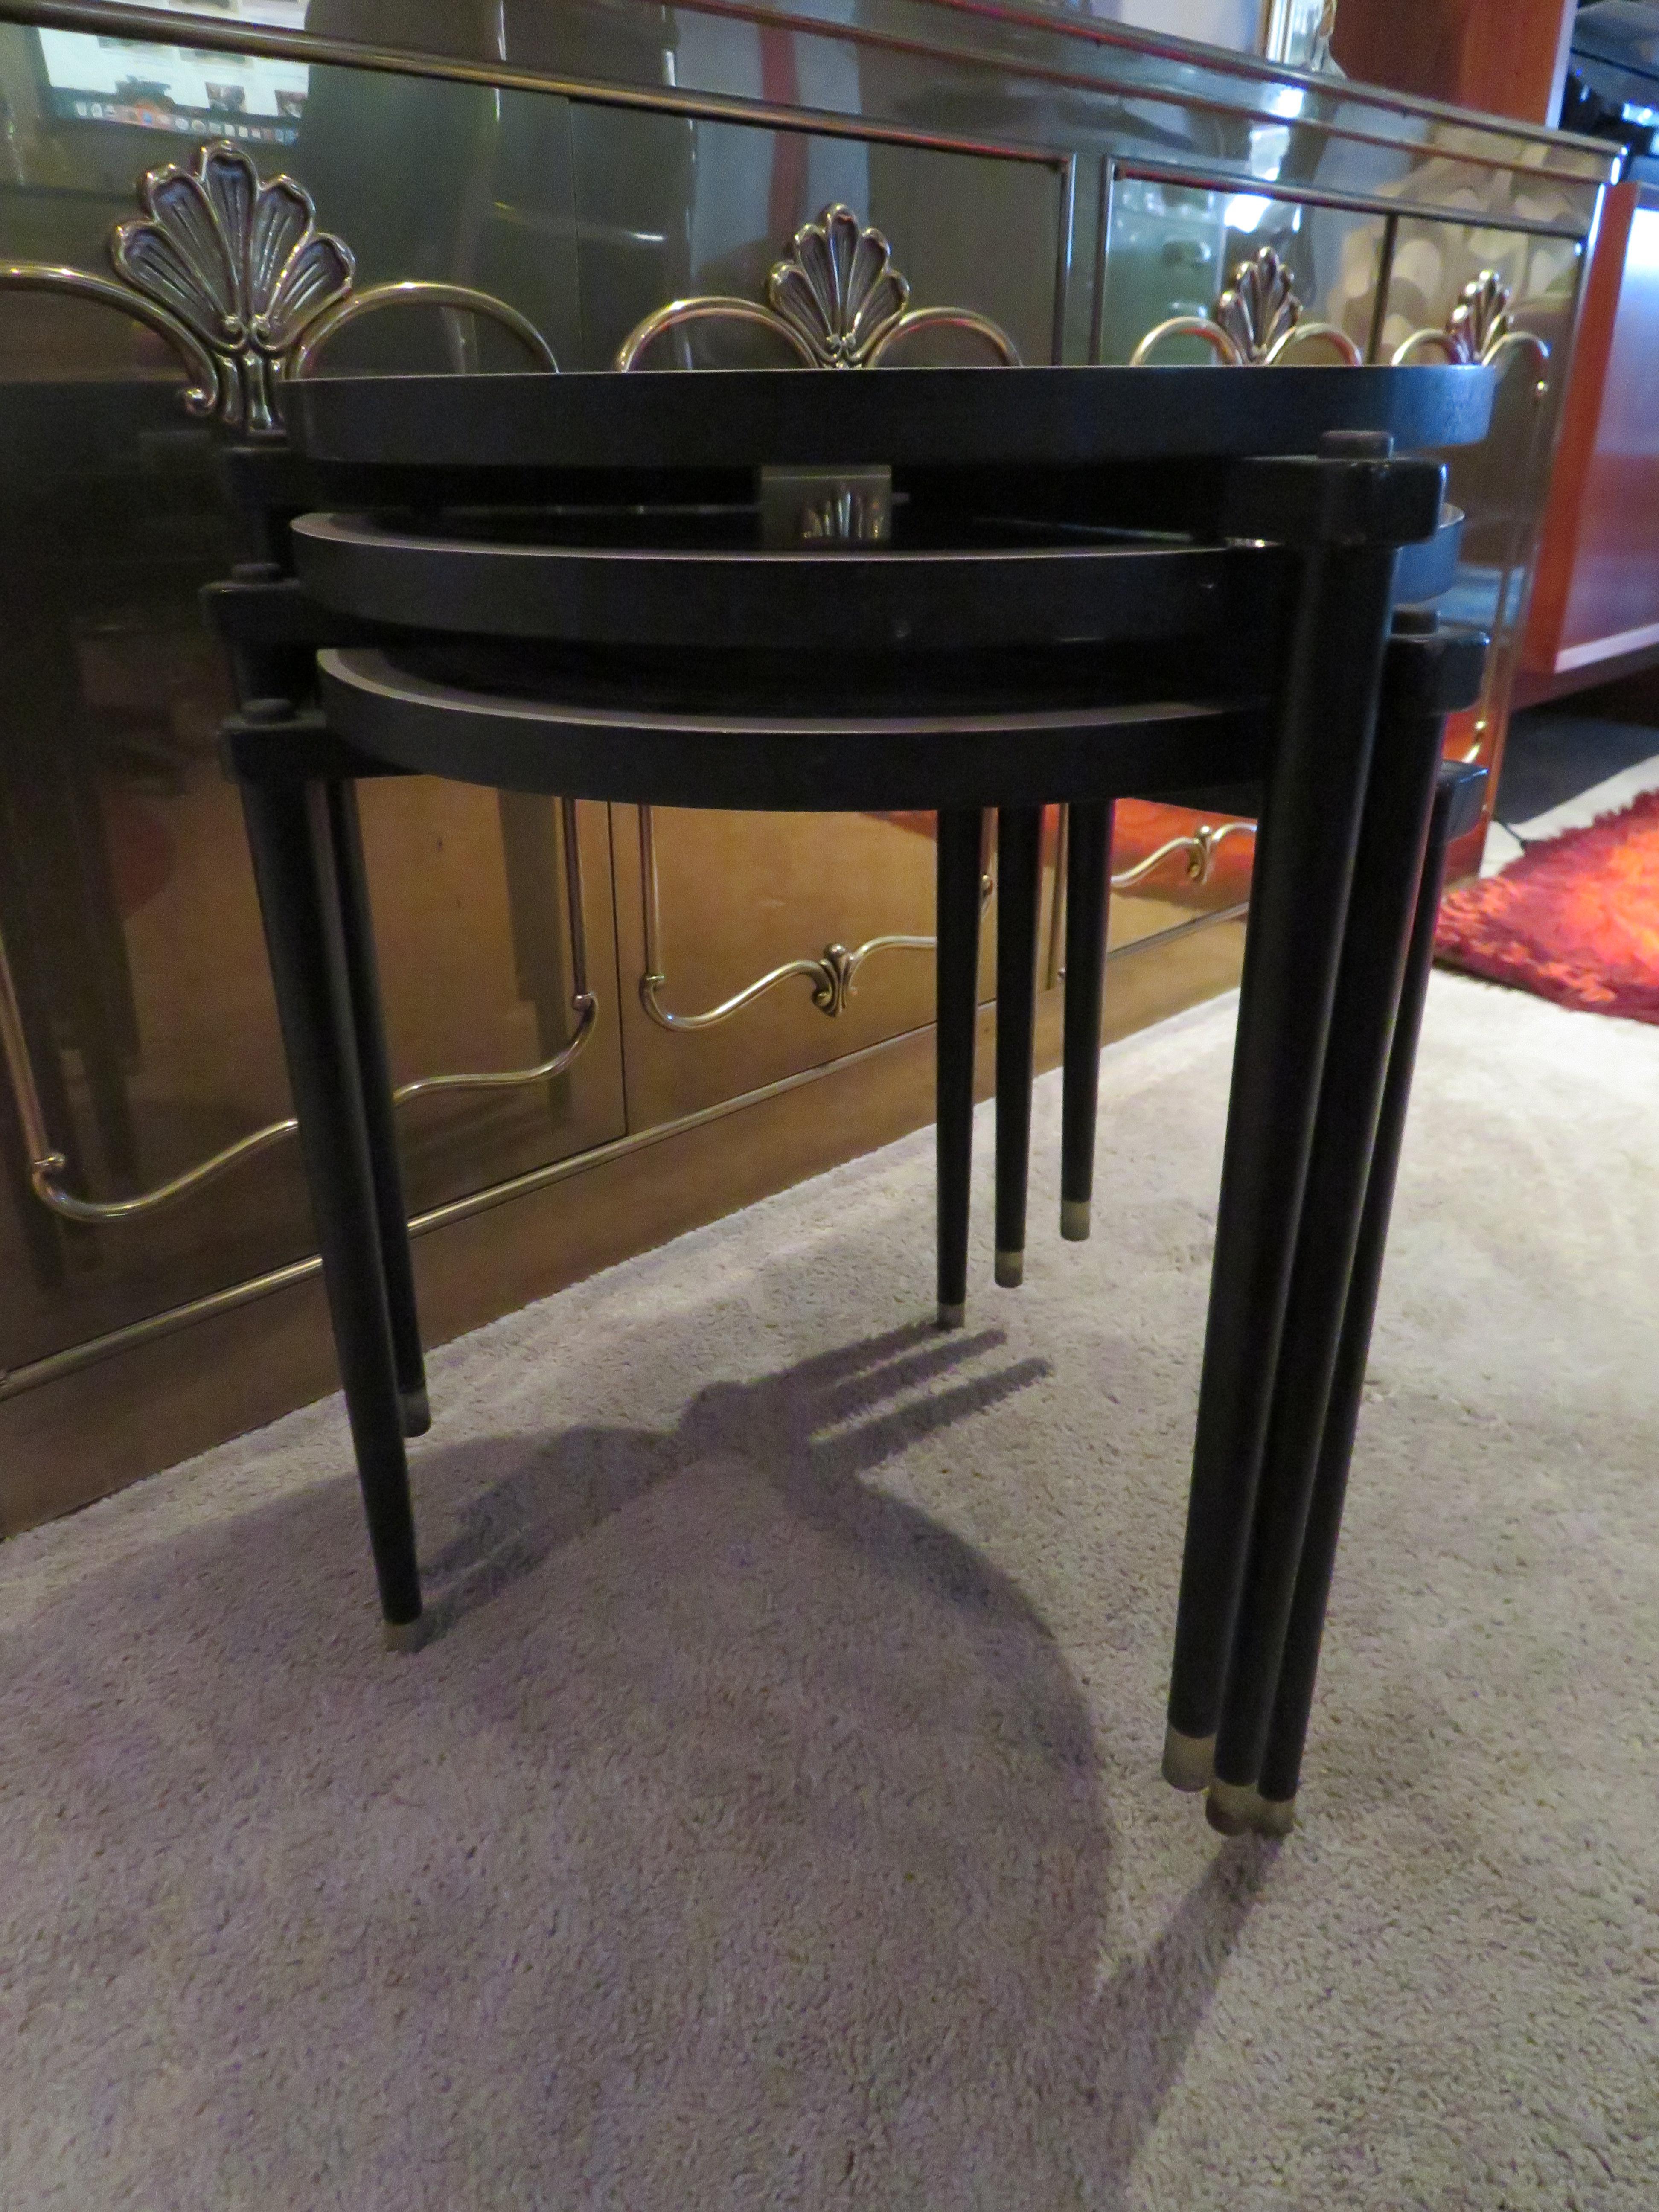 Charming Set of 3 Piero Fornasetti Style Stack Nesting Table Mid-Century Modern For Sale 6